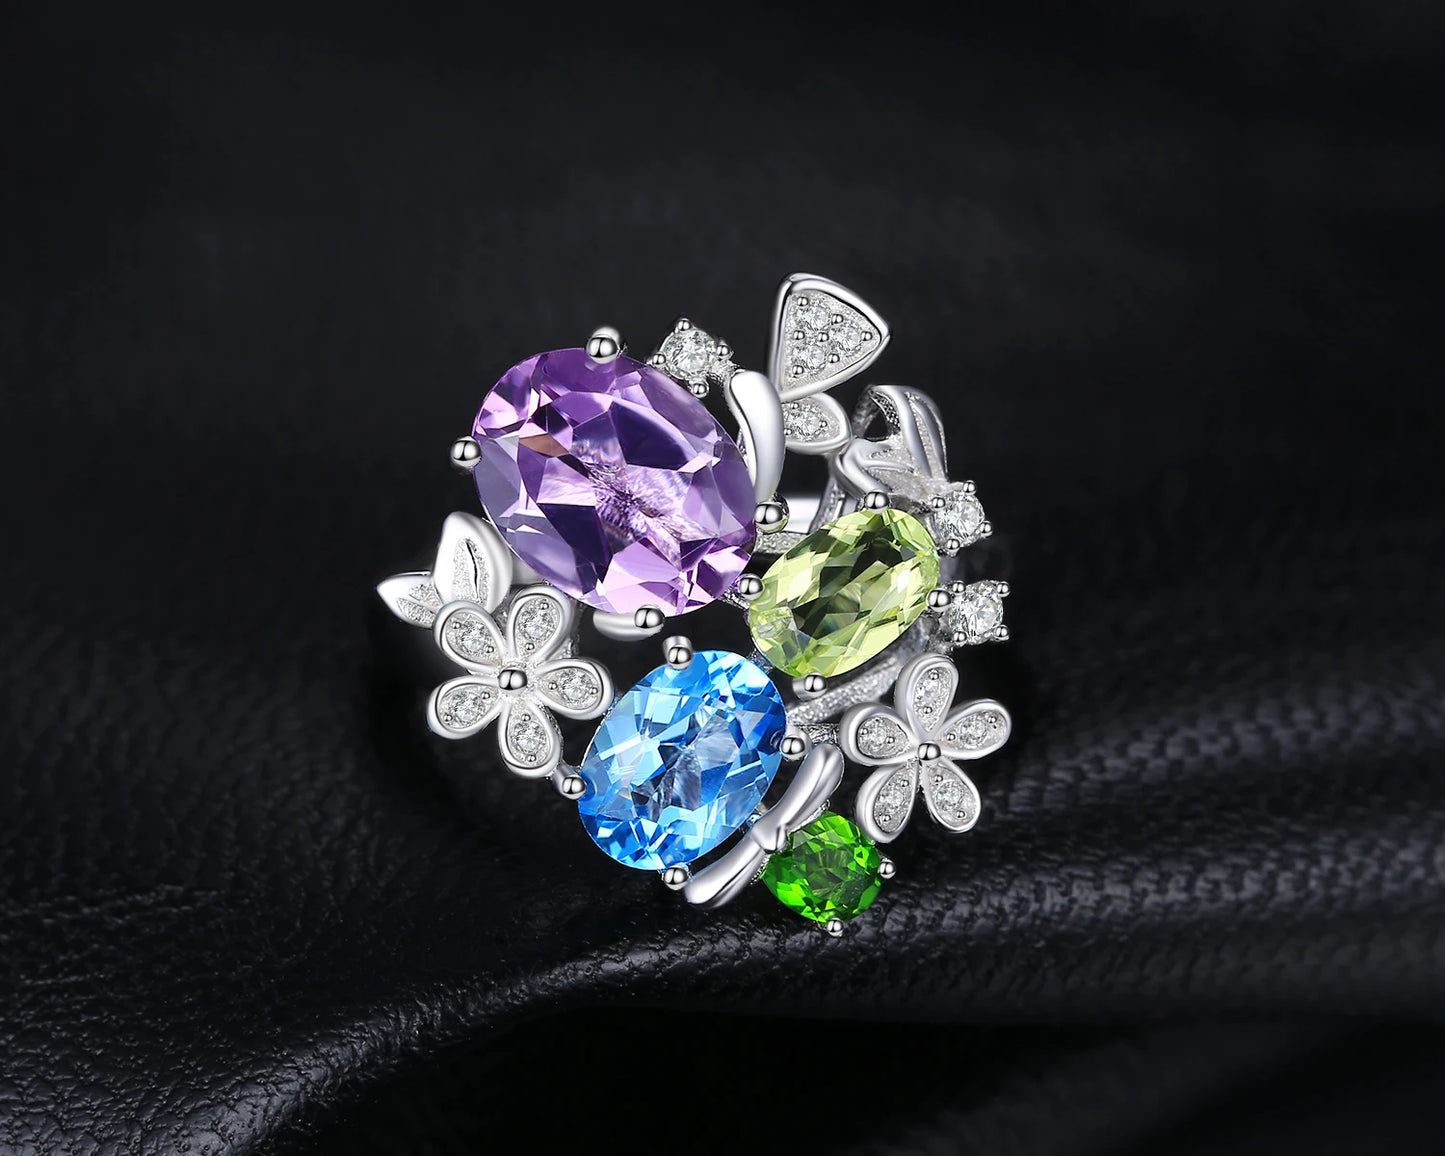 JewelryPalace Flower Natural Amethyst Blue Topaz Peridot Chrome Diopside Open Adjustable Cocktail Ring 925 Sterling Silver Women